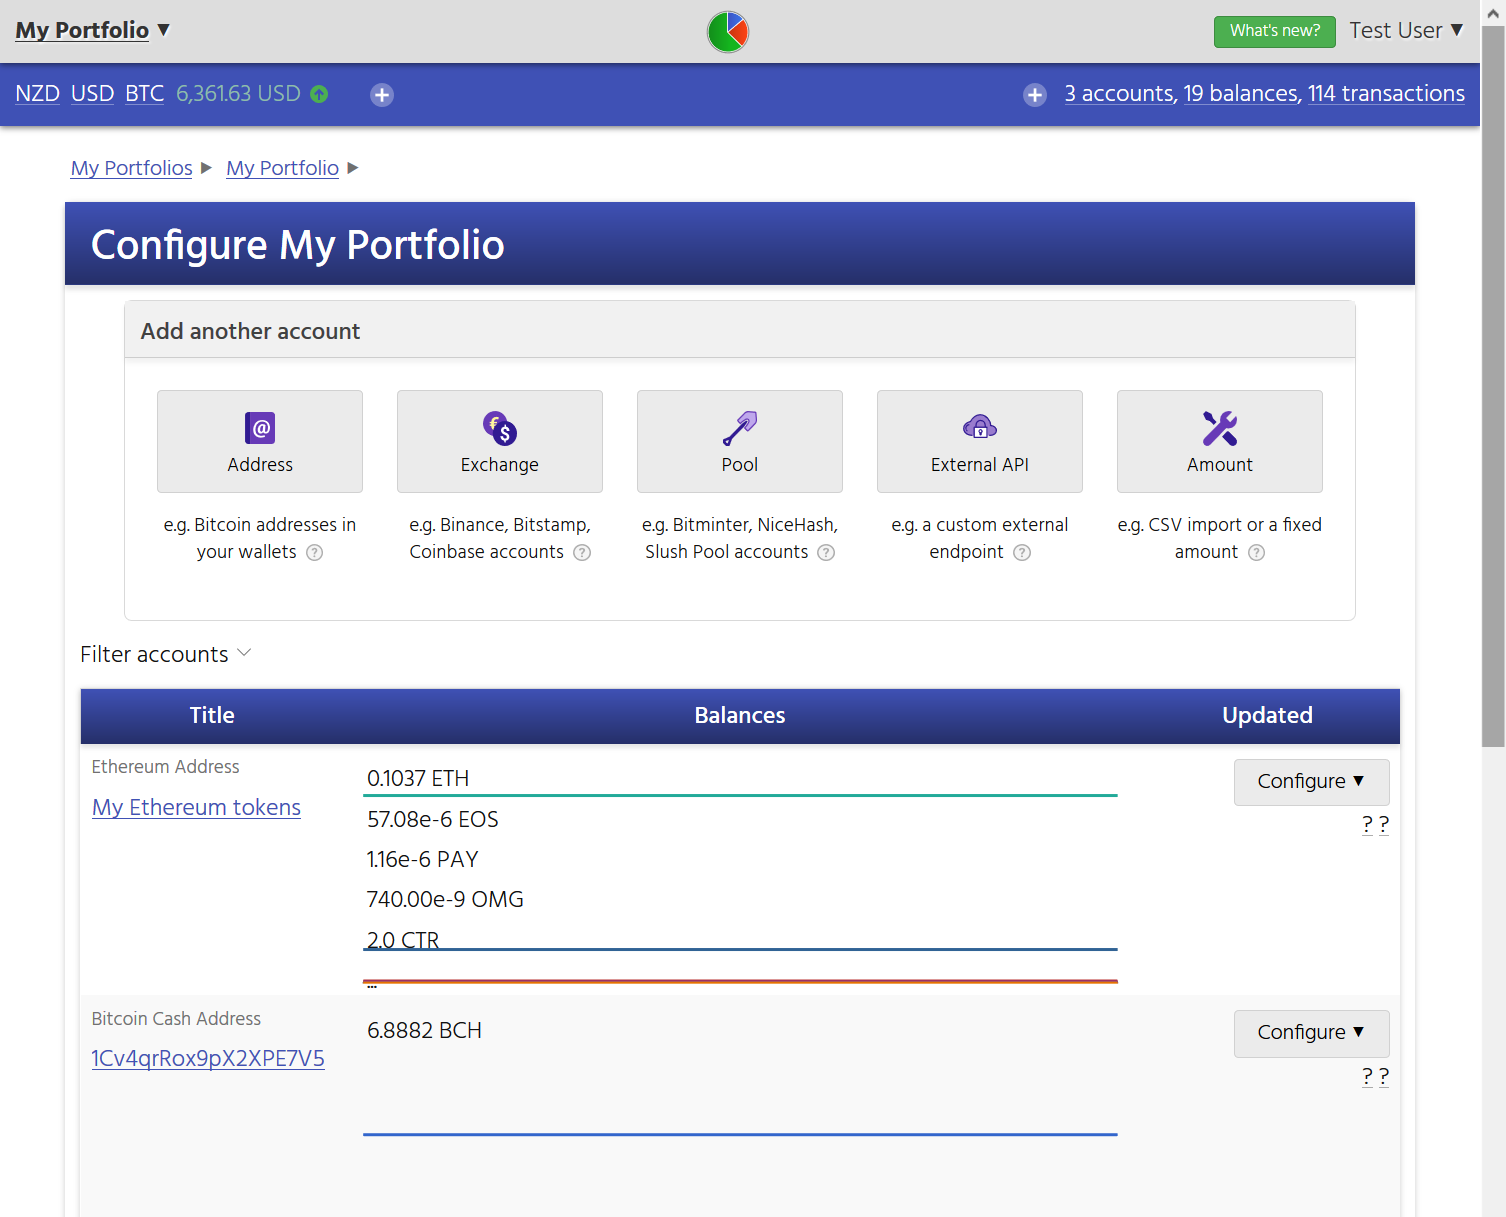 Screenshot showing the CryptFolio wizard interface to add new accounts, such as new wallets, addresses, or mining pools.